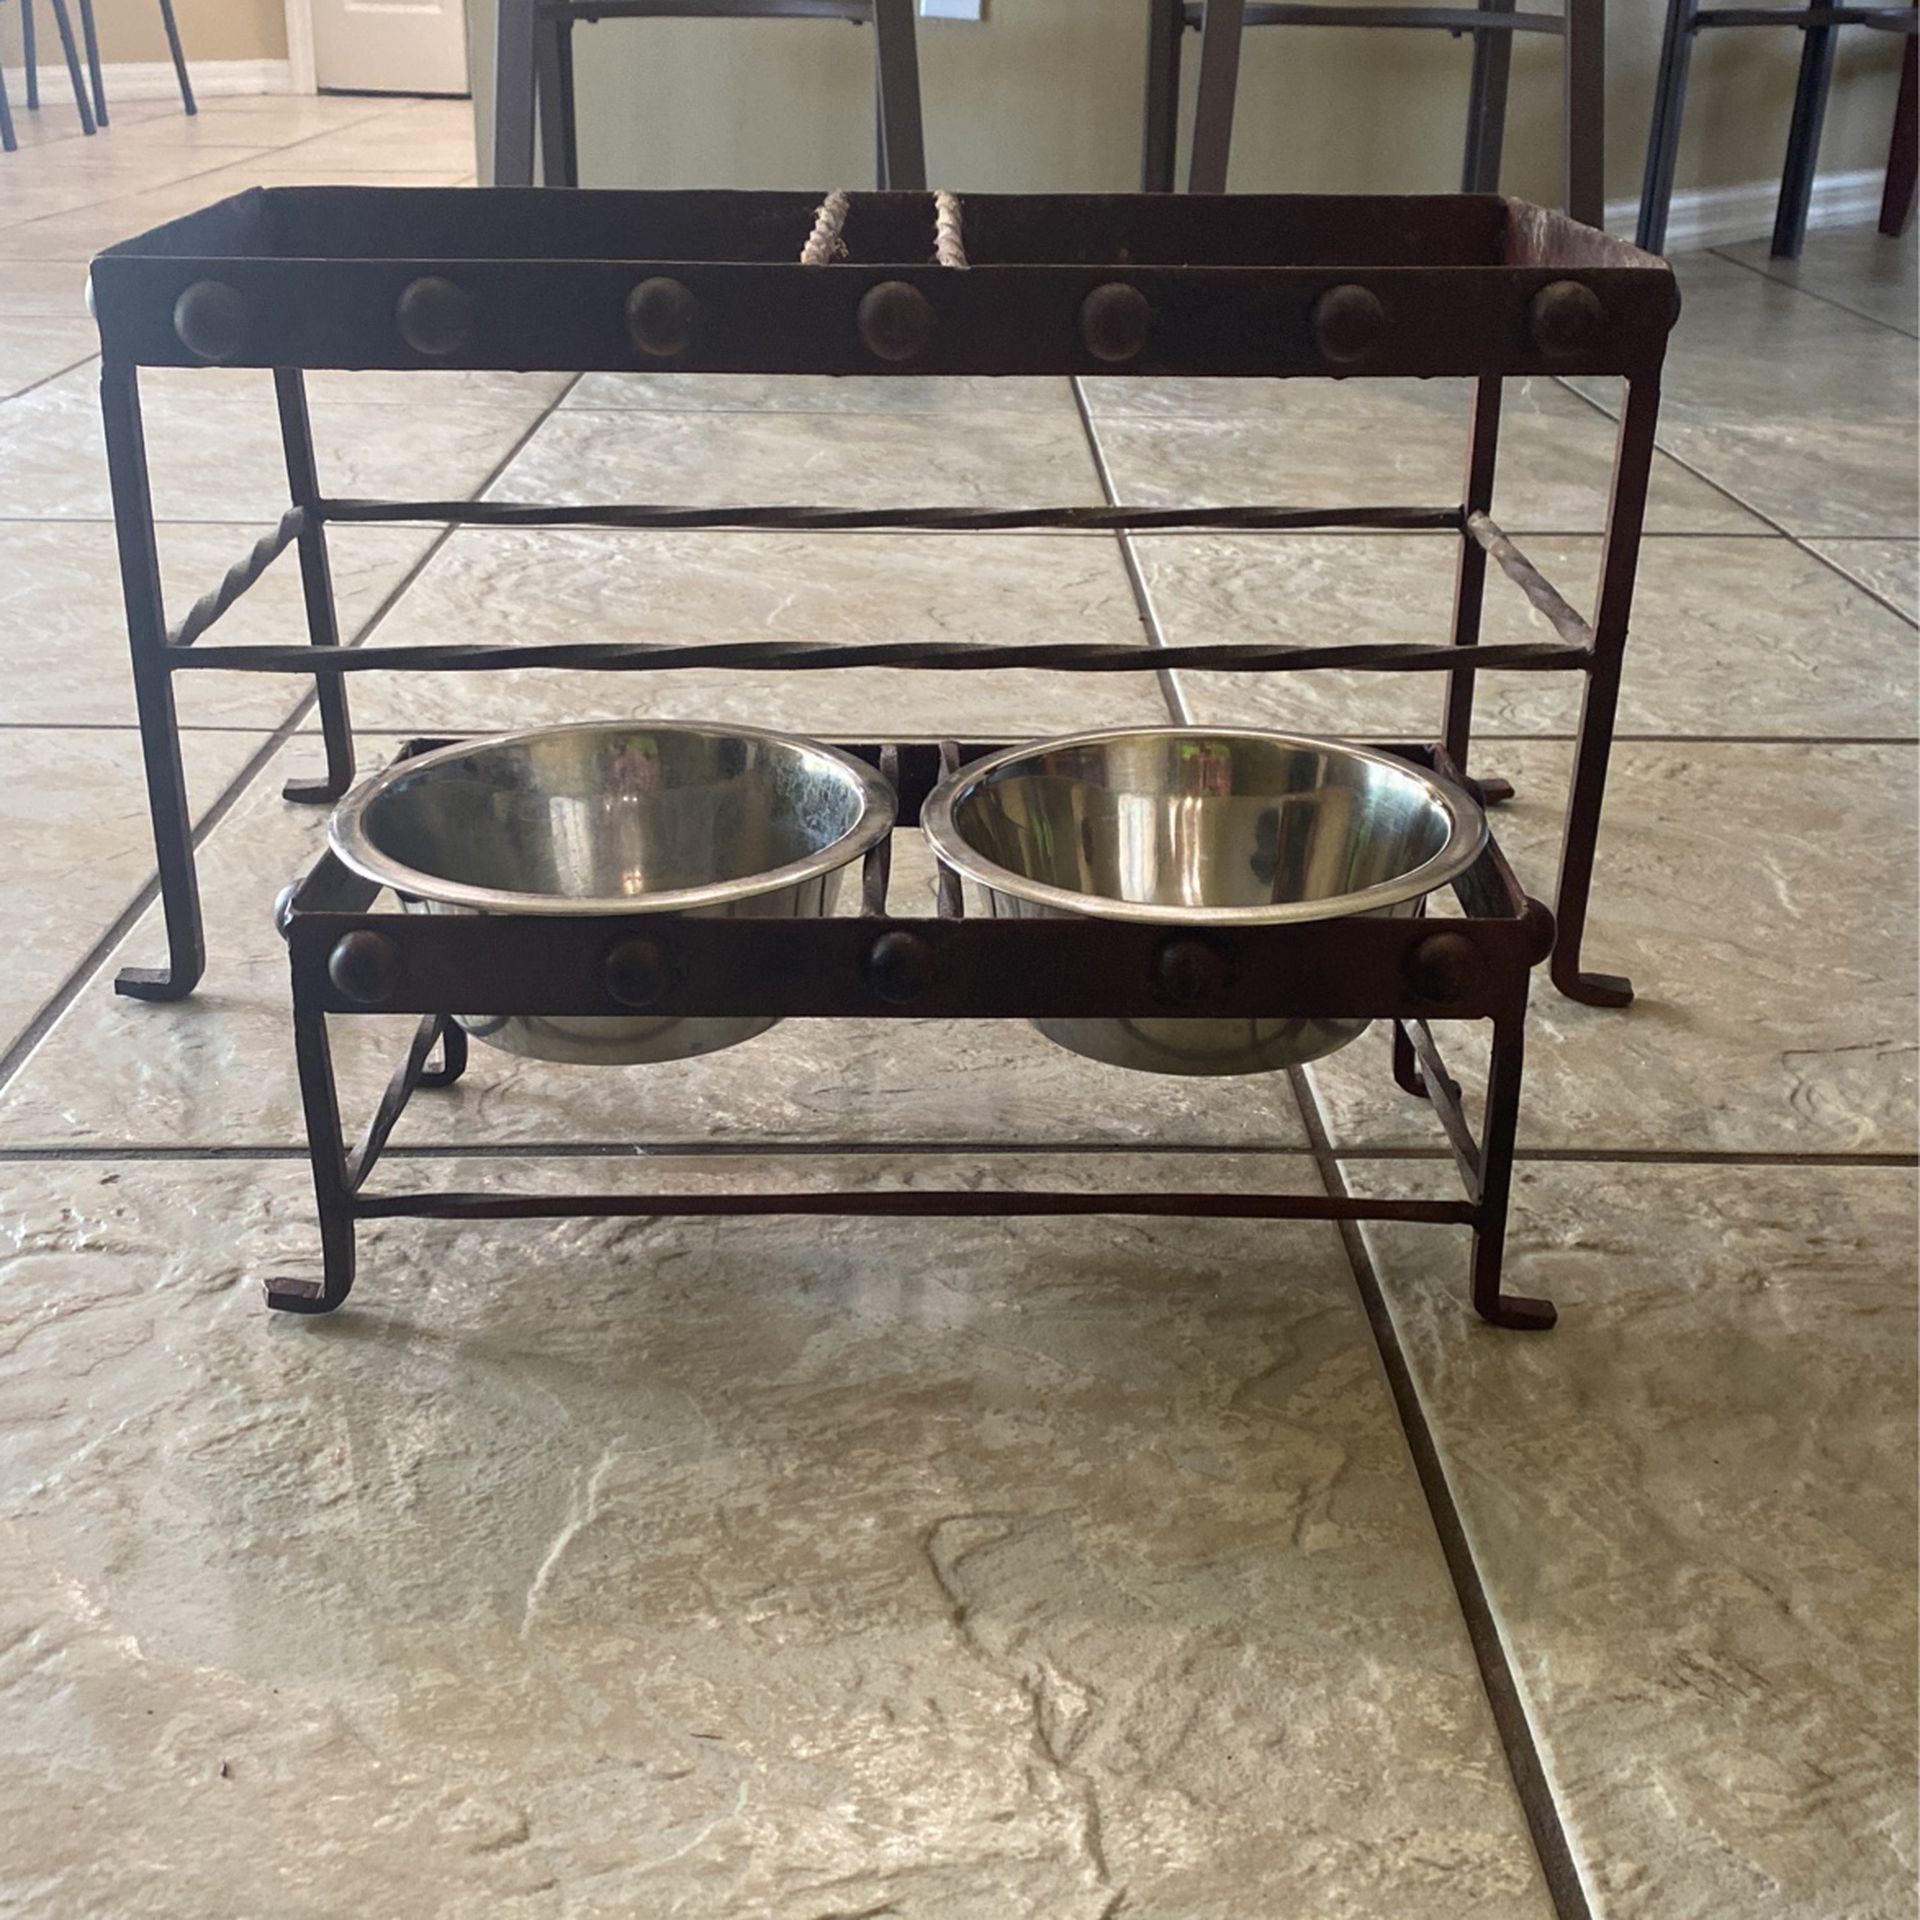 Dog Feeding Stand Very Heavy 1-Large Dog 1-small Dog , Will Separate But Prefer Selling As Set